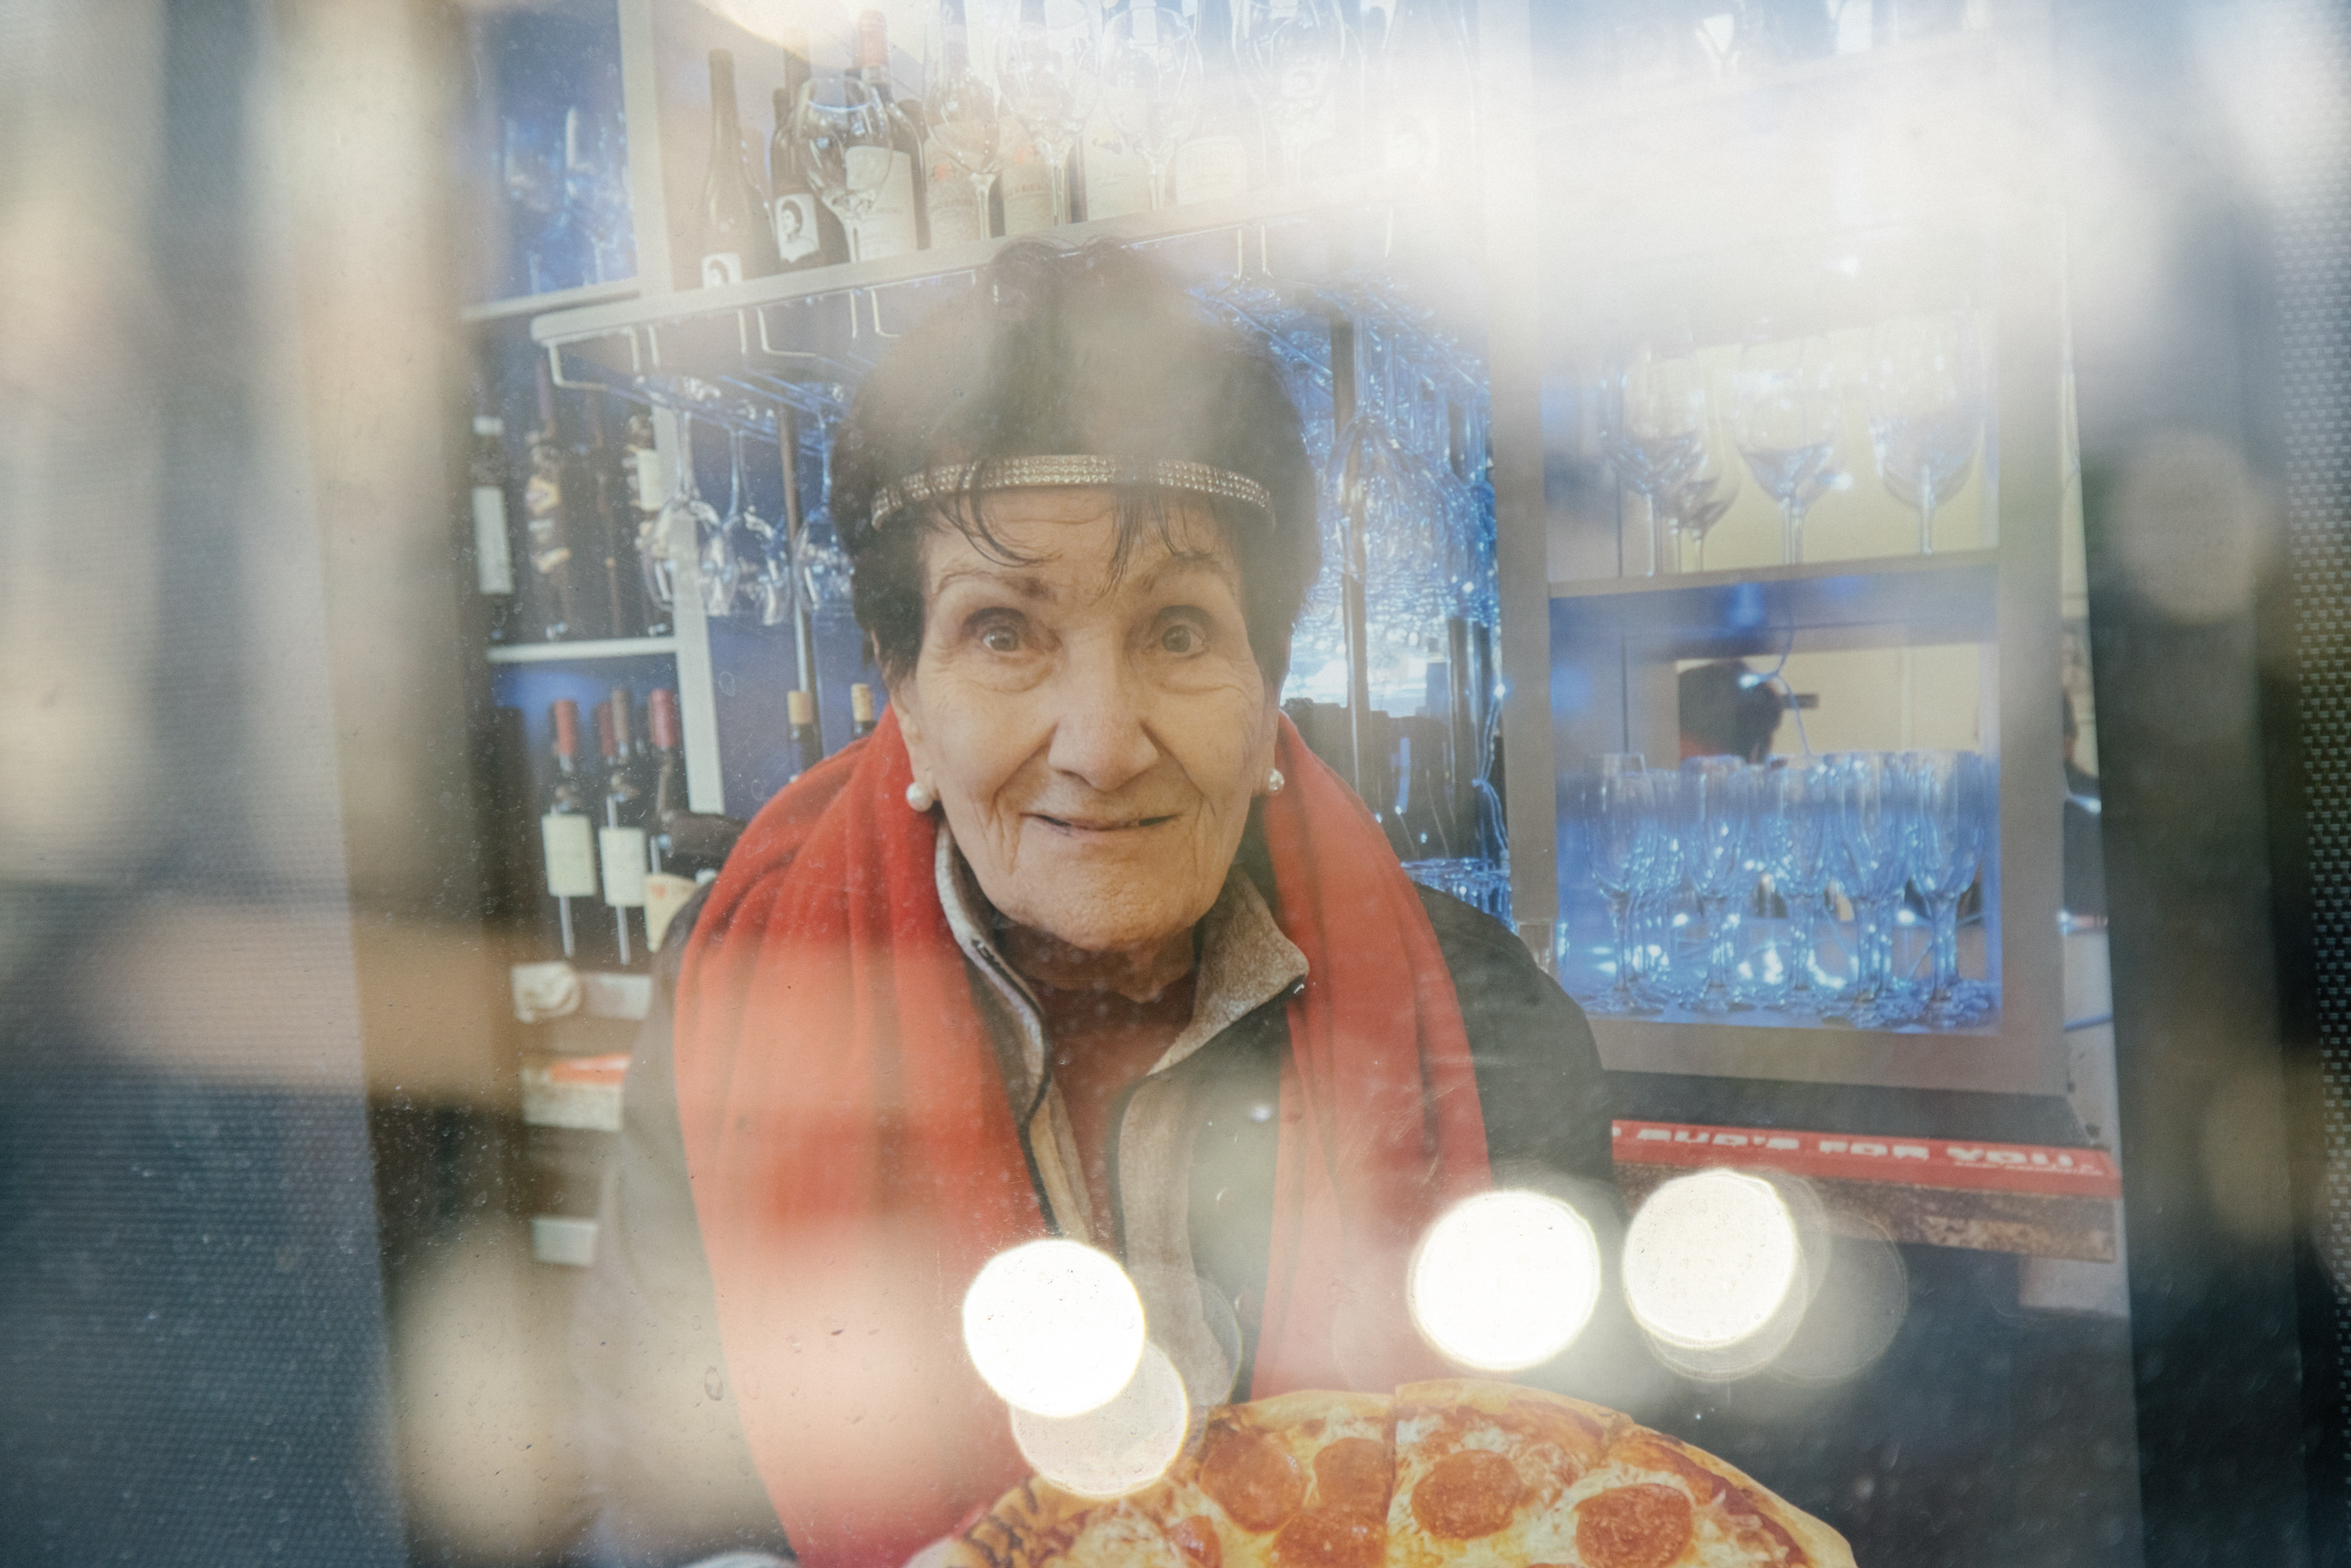 A smiling elderly person with a headband indoors, viewed through a glass window with reflections, beside a pizza on a table.